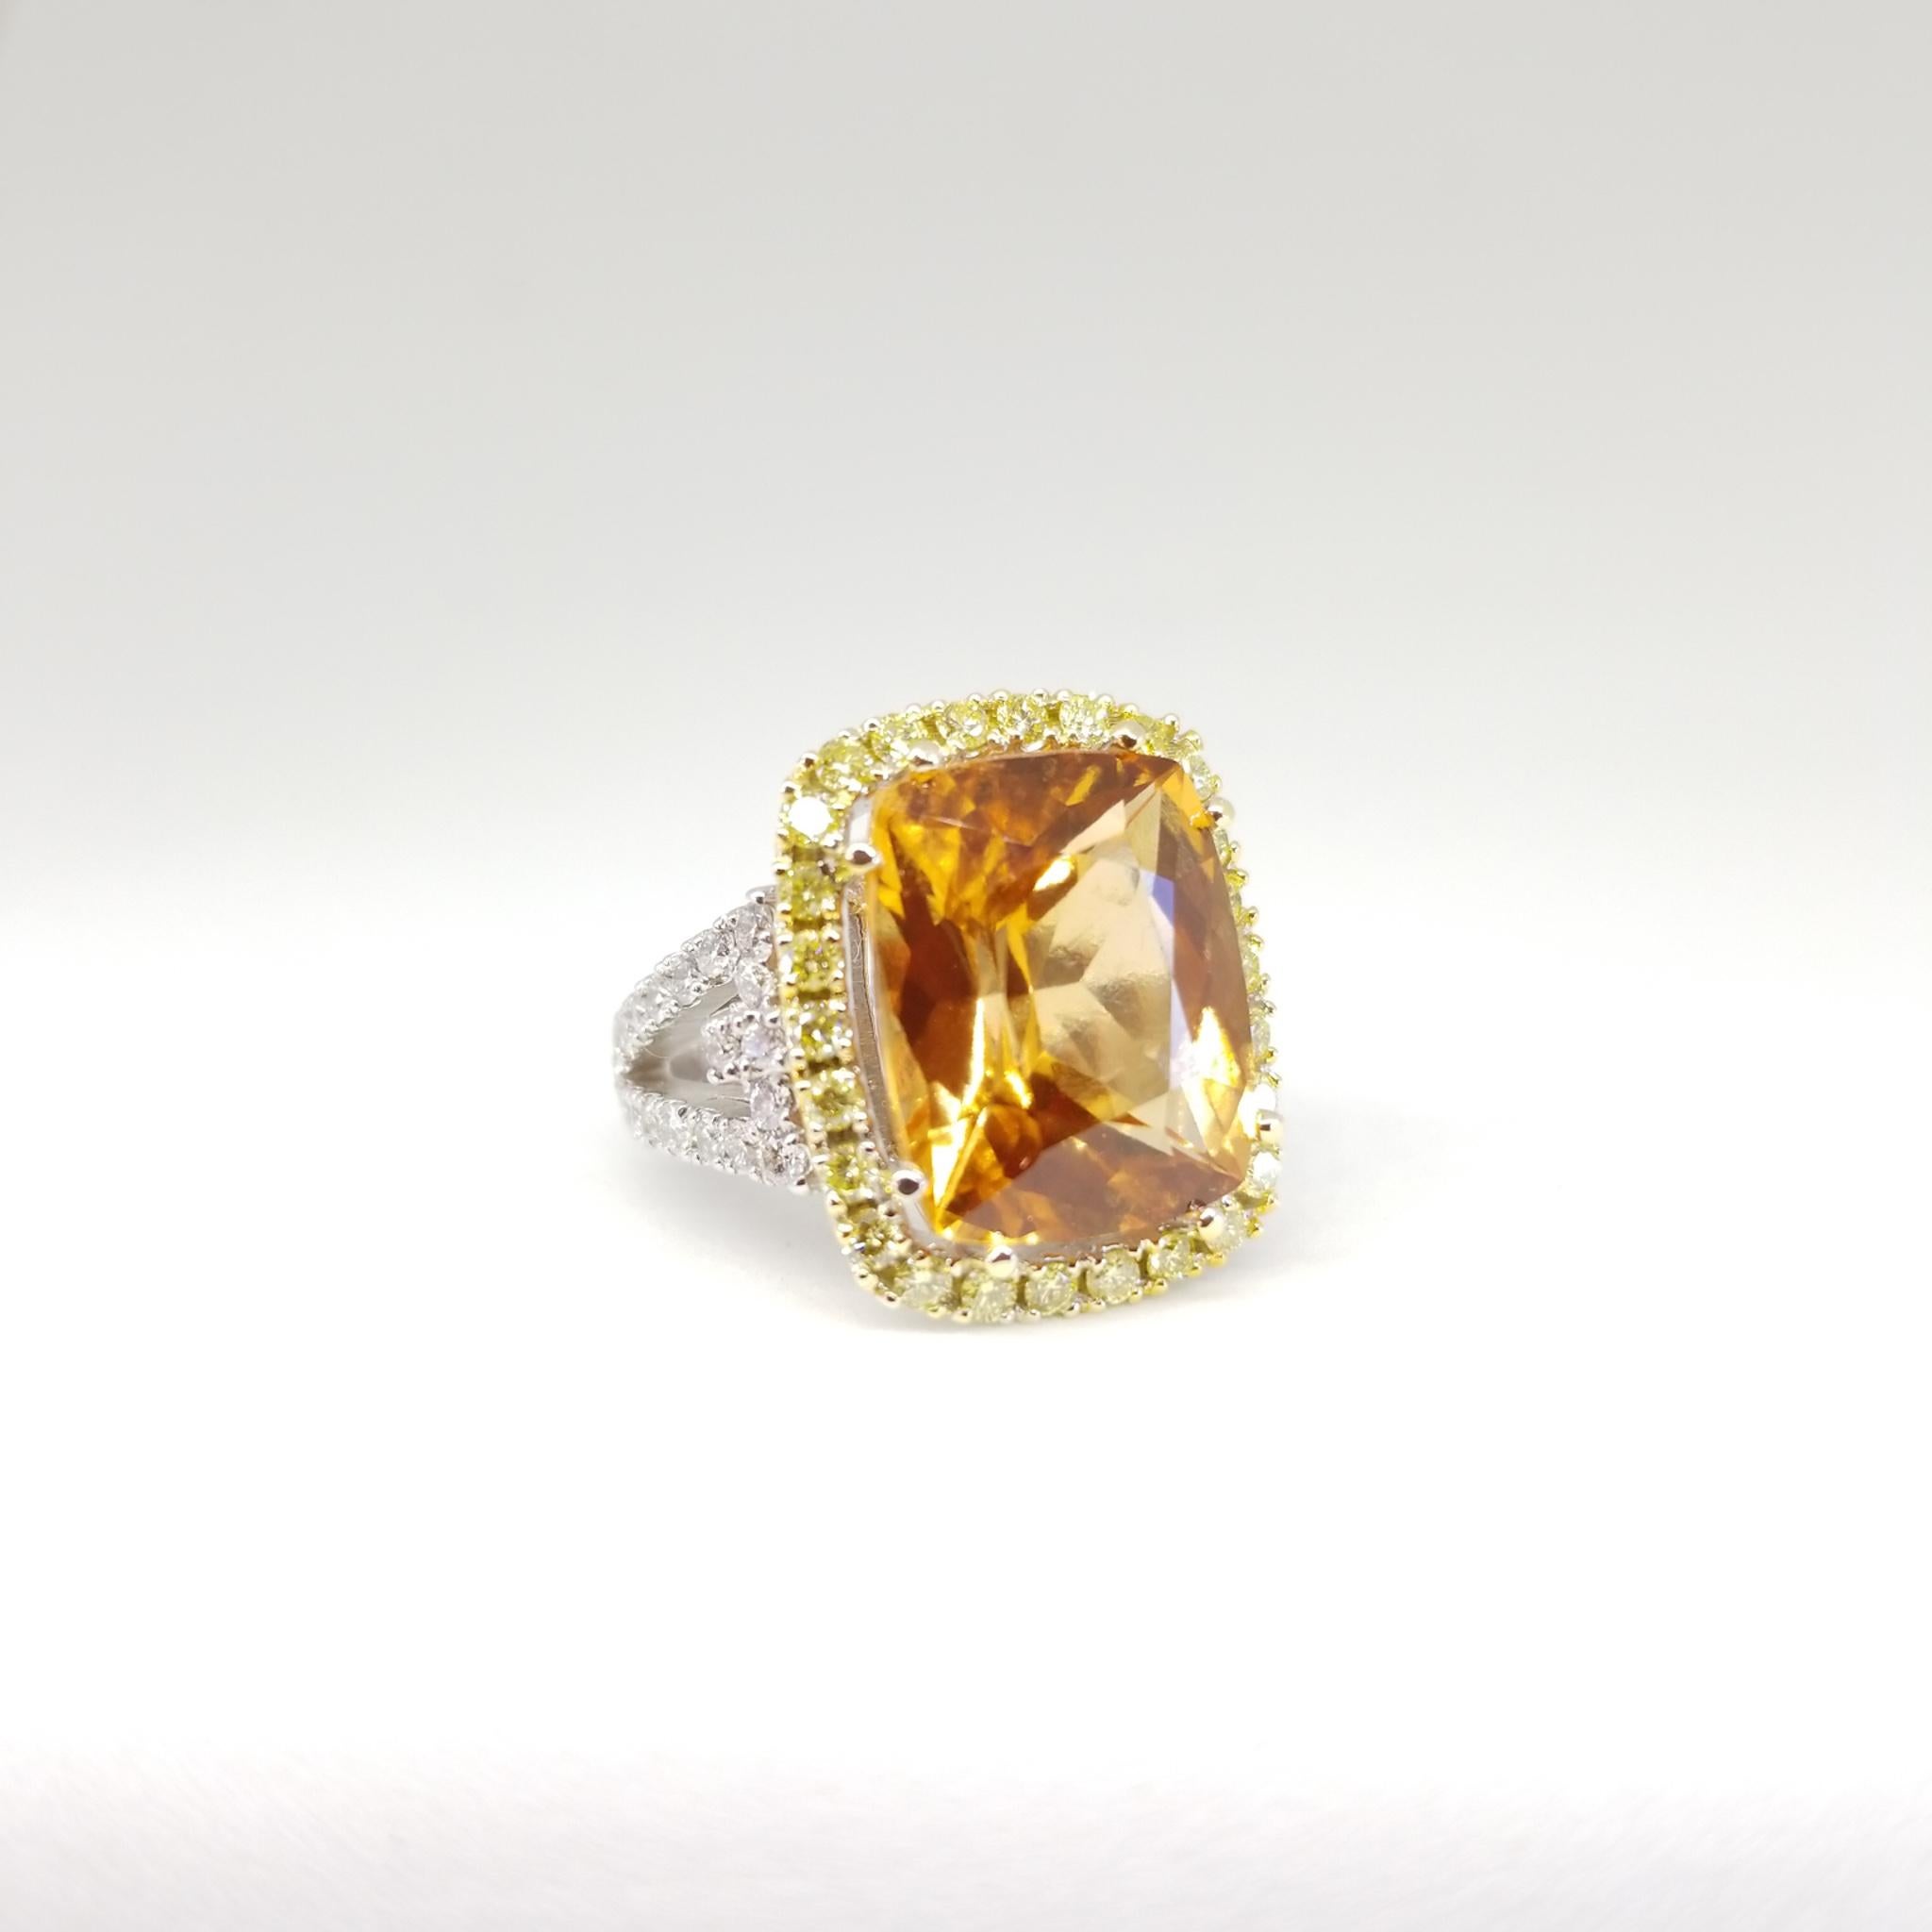 13.46 Carat Natural Grossular Garnet 1.75 Carat Canary and White Diamond Ring For Sale 3